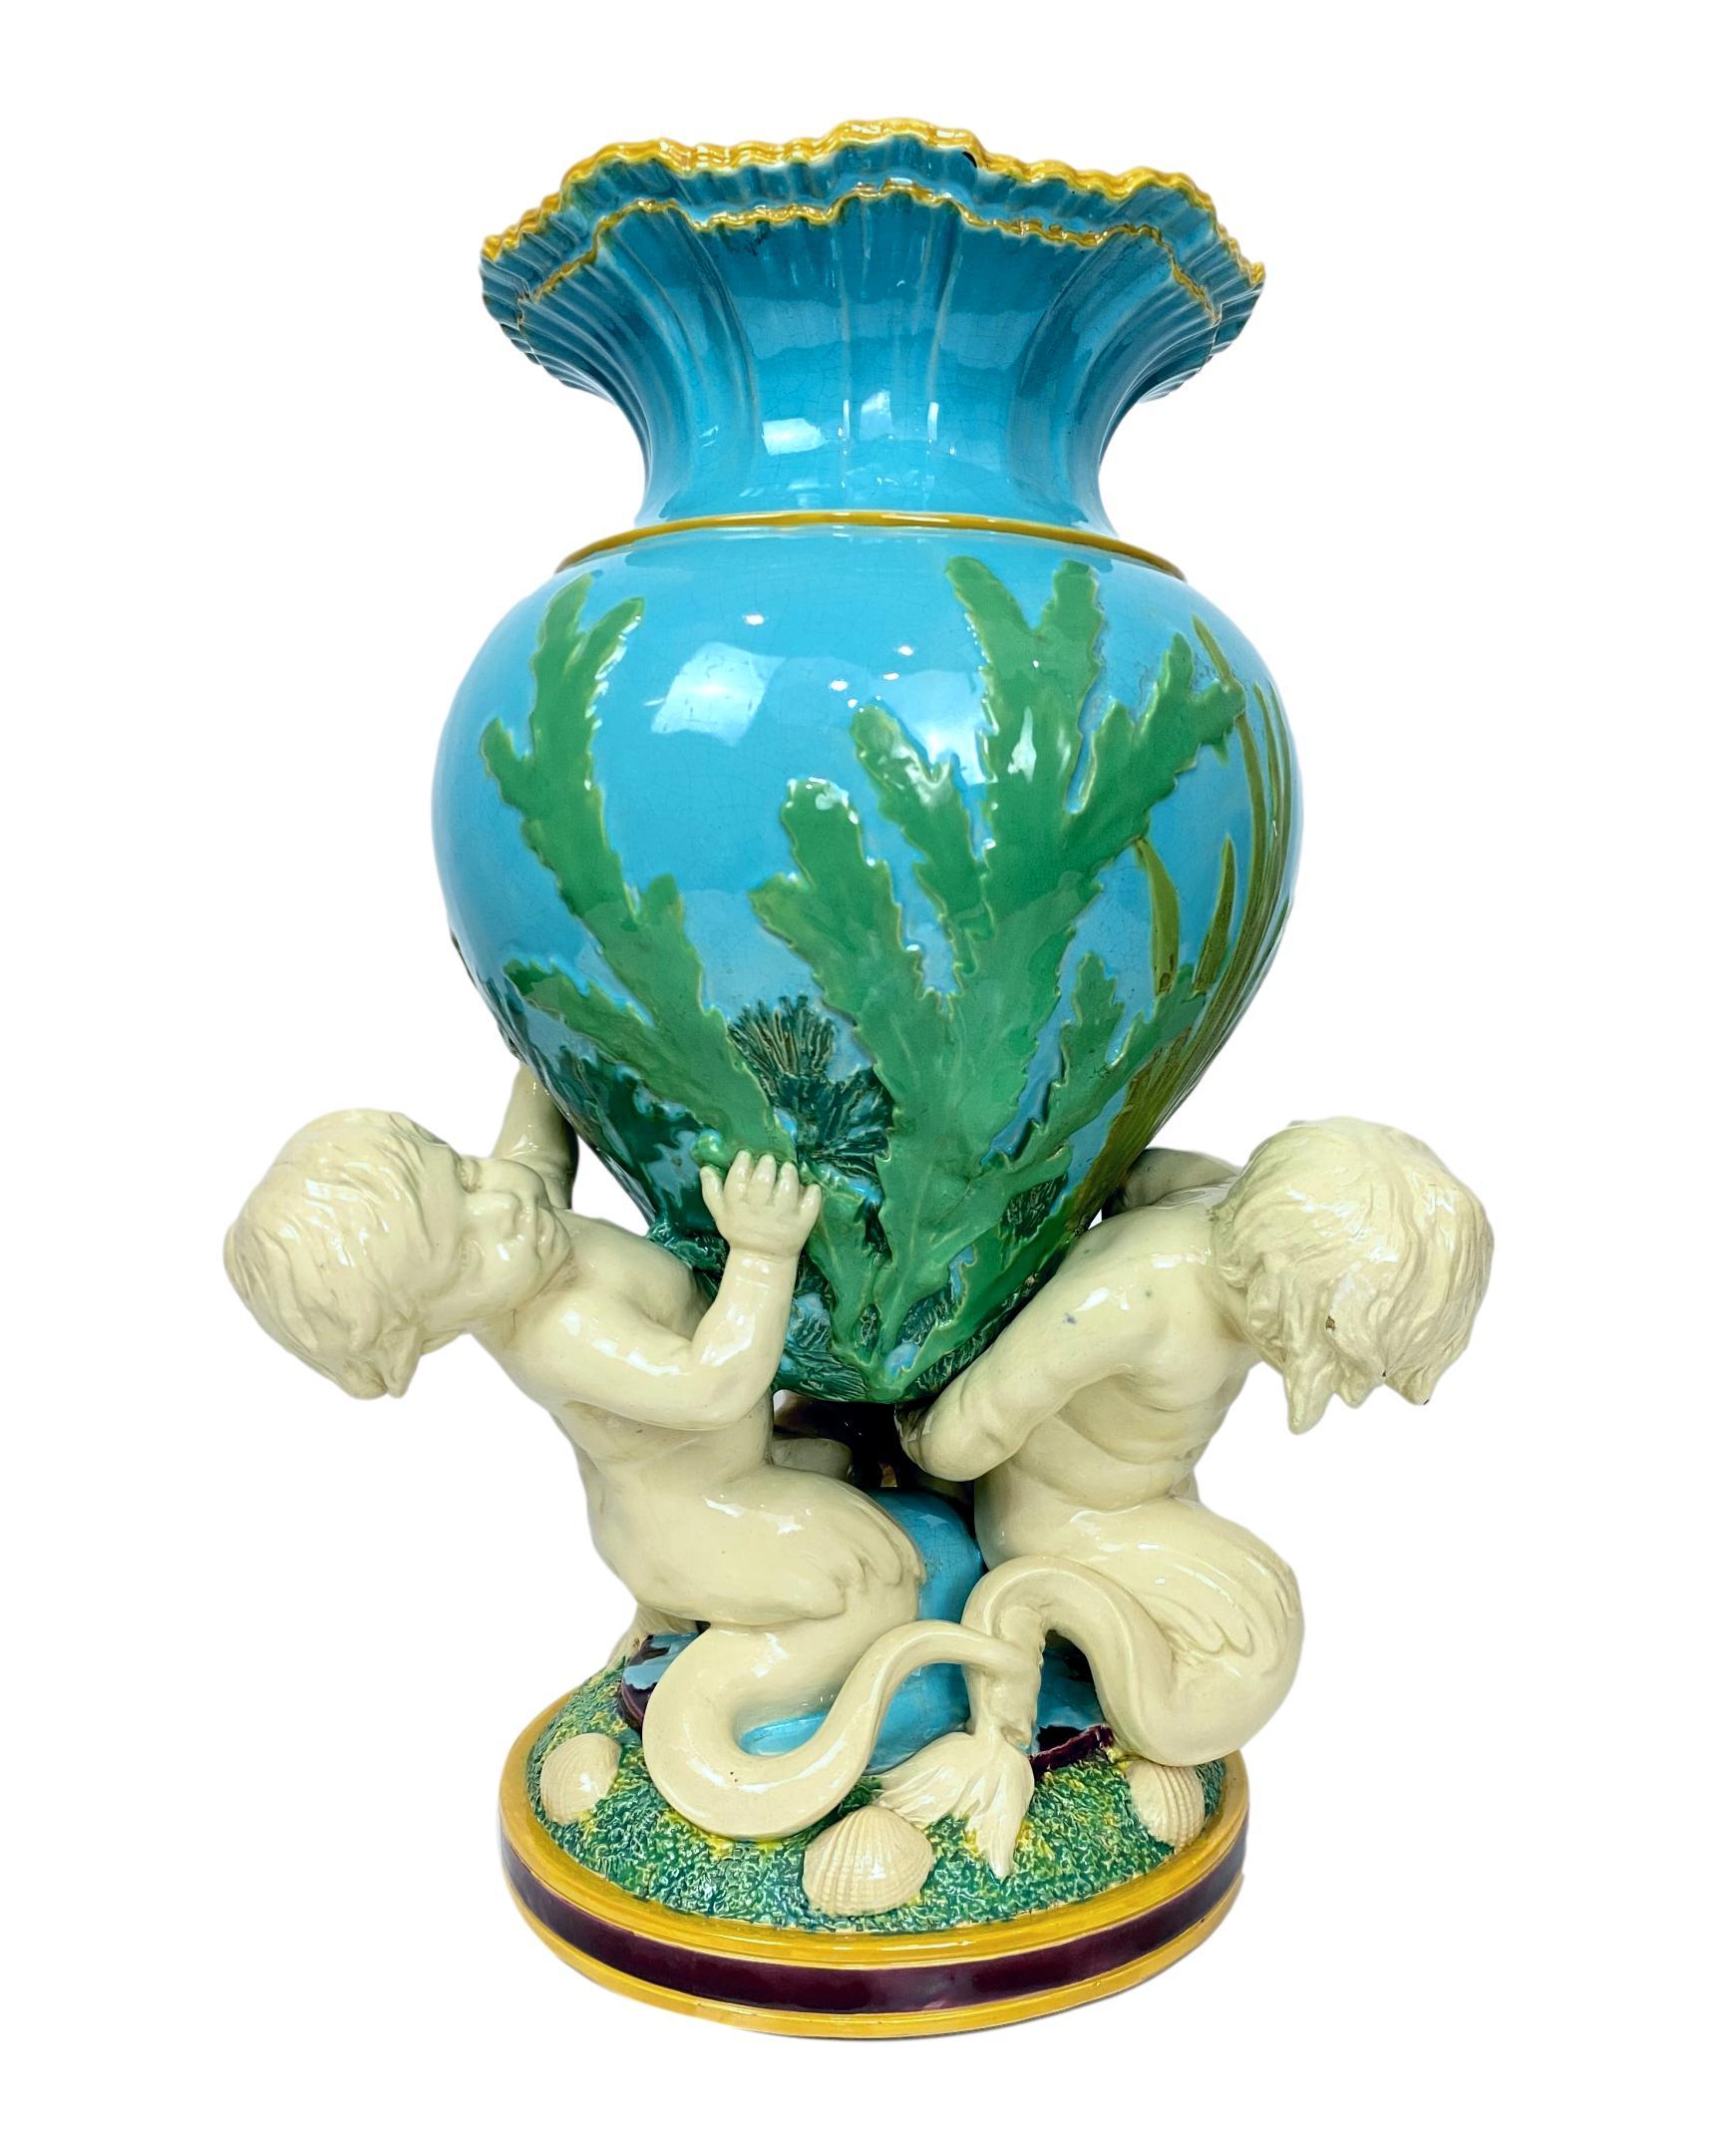 Large 17-inch Minton Majolica 'Marine Flower Vase,' Design number 526, design registered 1855. 
Modeled as Triton's Golden Palace on the Bottom of the Sea.
In Susan Weber's new three-volume tome, MAJOLICA MANIA, published by Yale University Press,